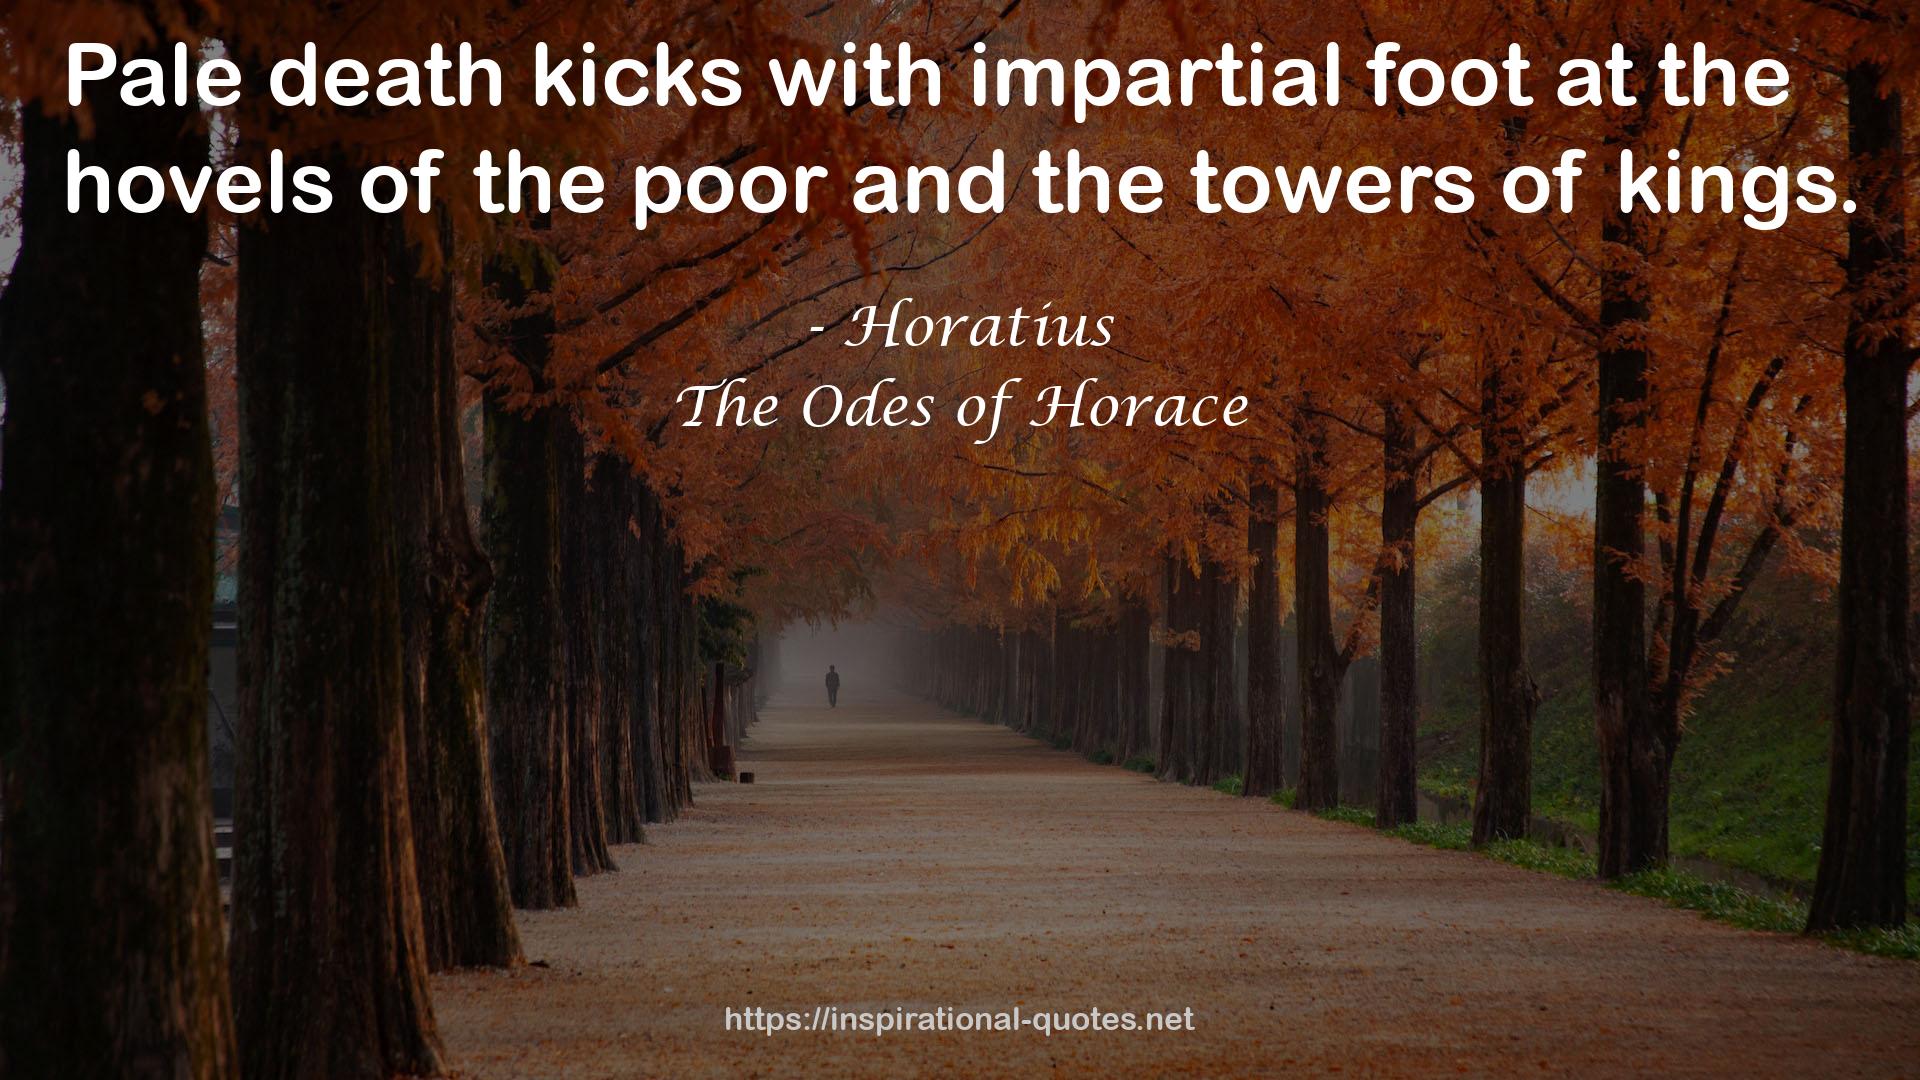 The Odes of Horace QUOTES